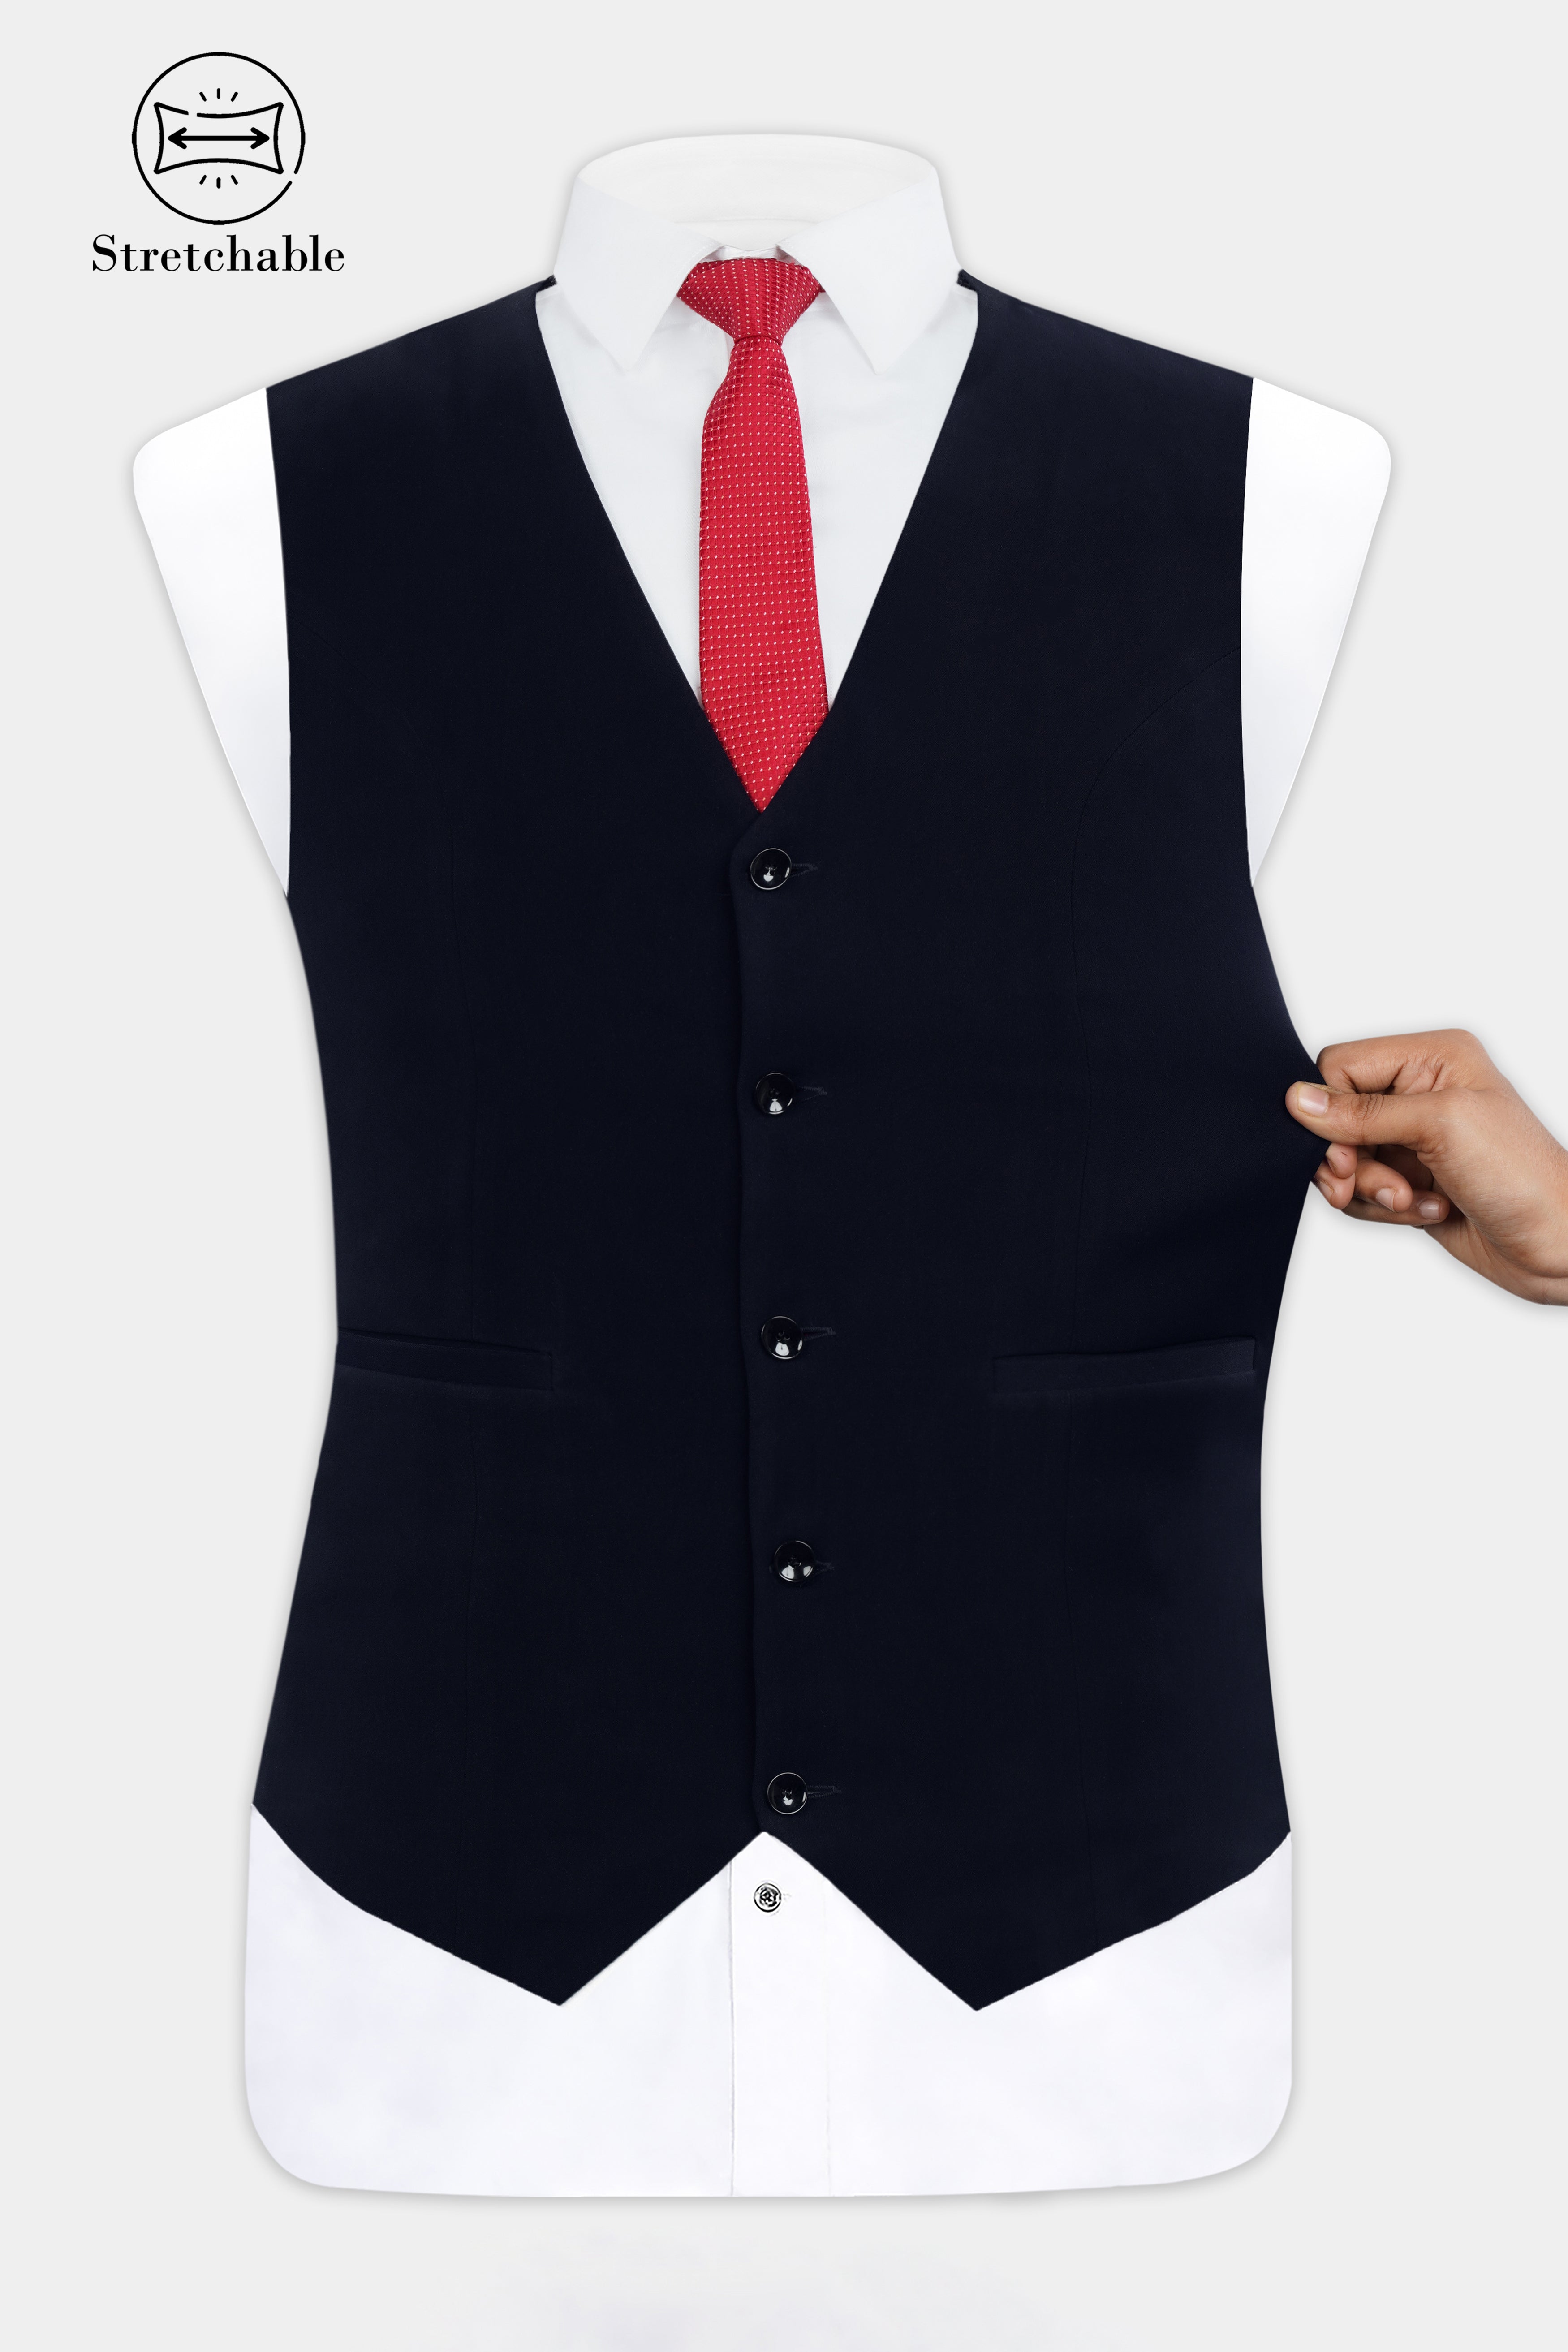 Korean Blue (The Best Blue We have) Wool Rich Stretchable Traveler Waistcoat